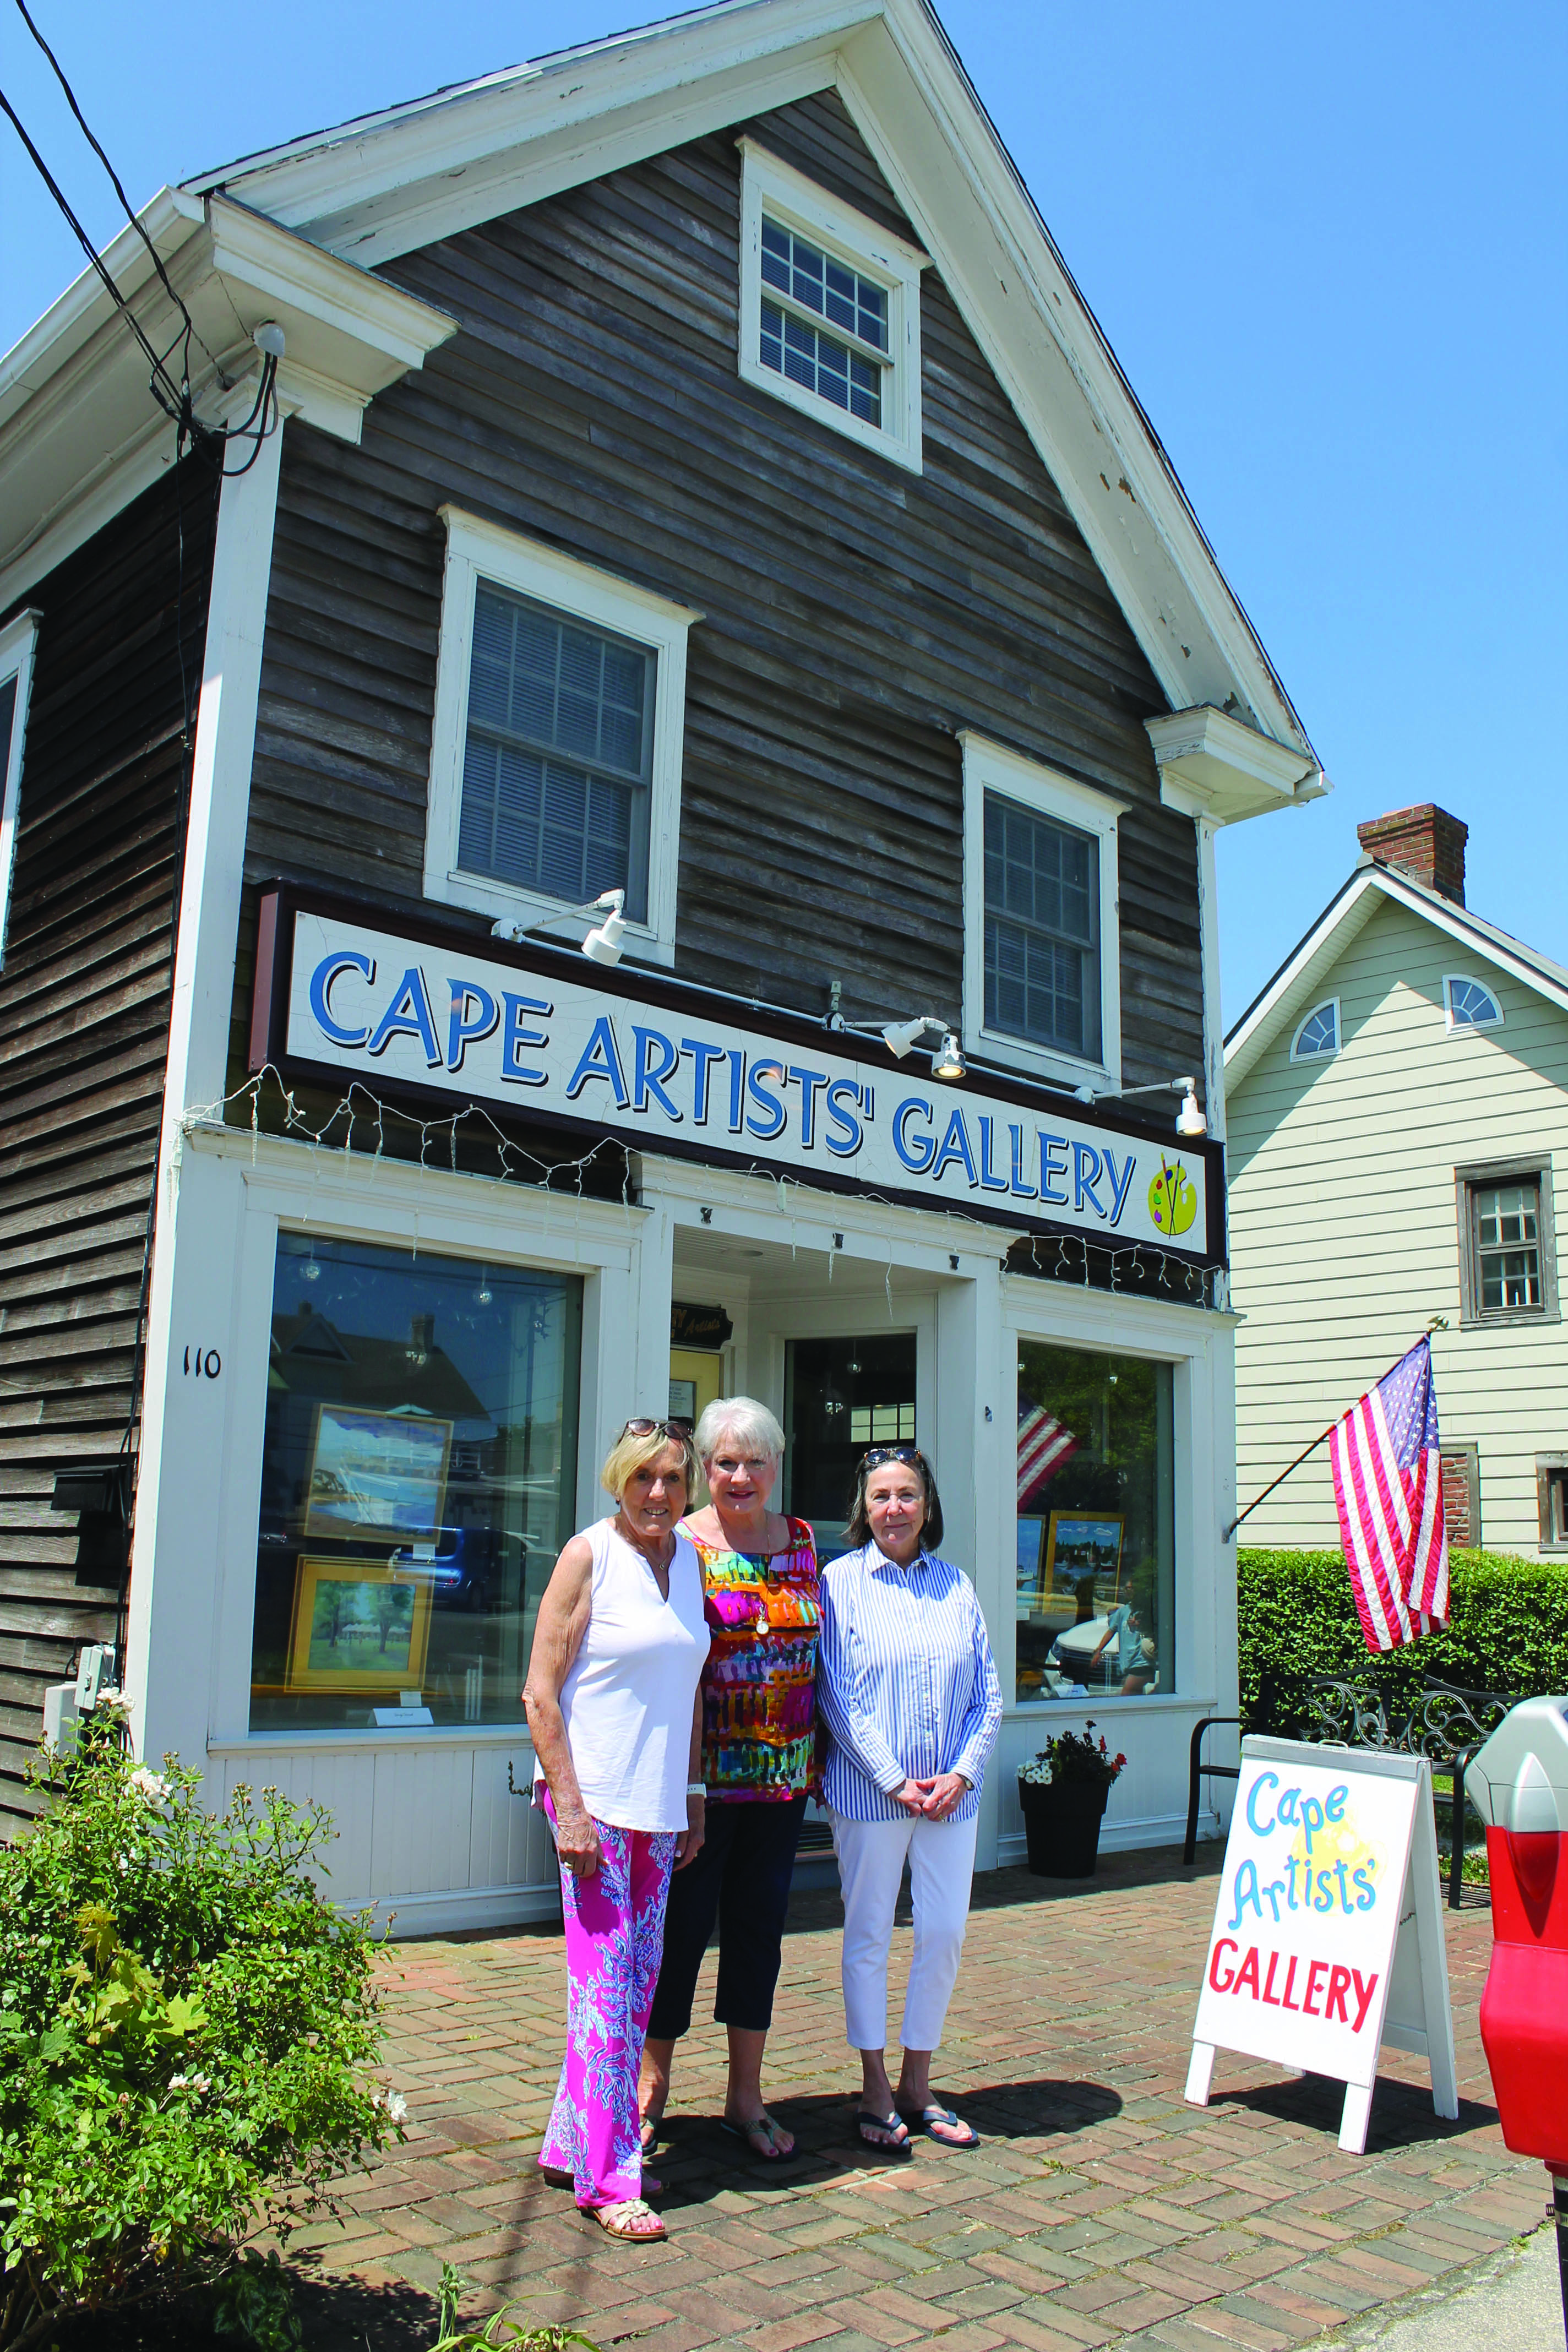 The 100-year-old building on 3rd Street in Lewes that houses the Cape Artists' Gallery is home to 22 members and their artwork.